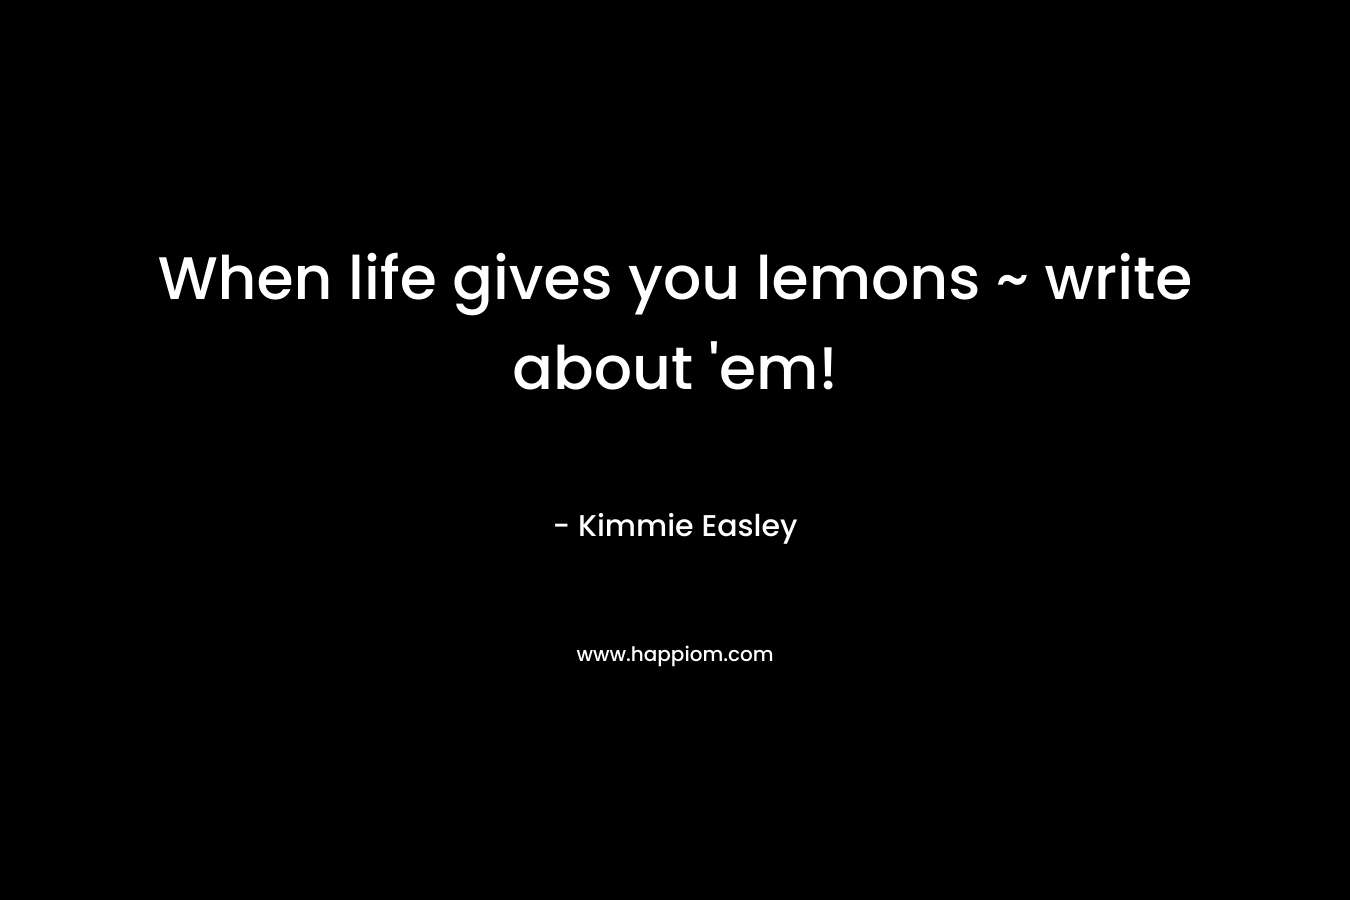 When life gives you lemons ~ write about 'em!